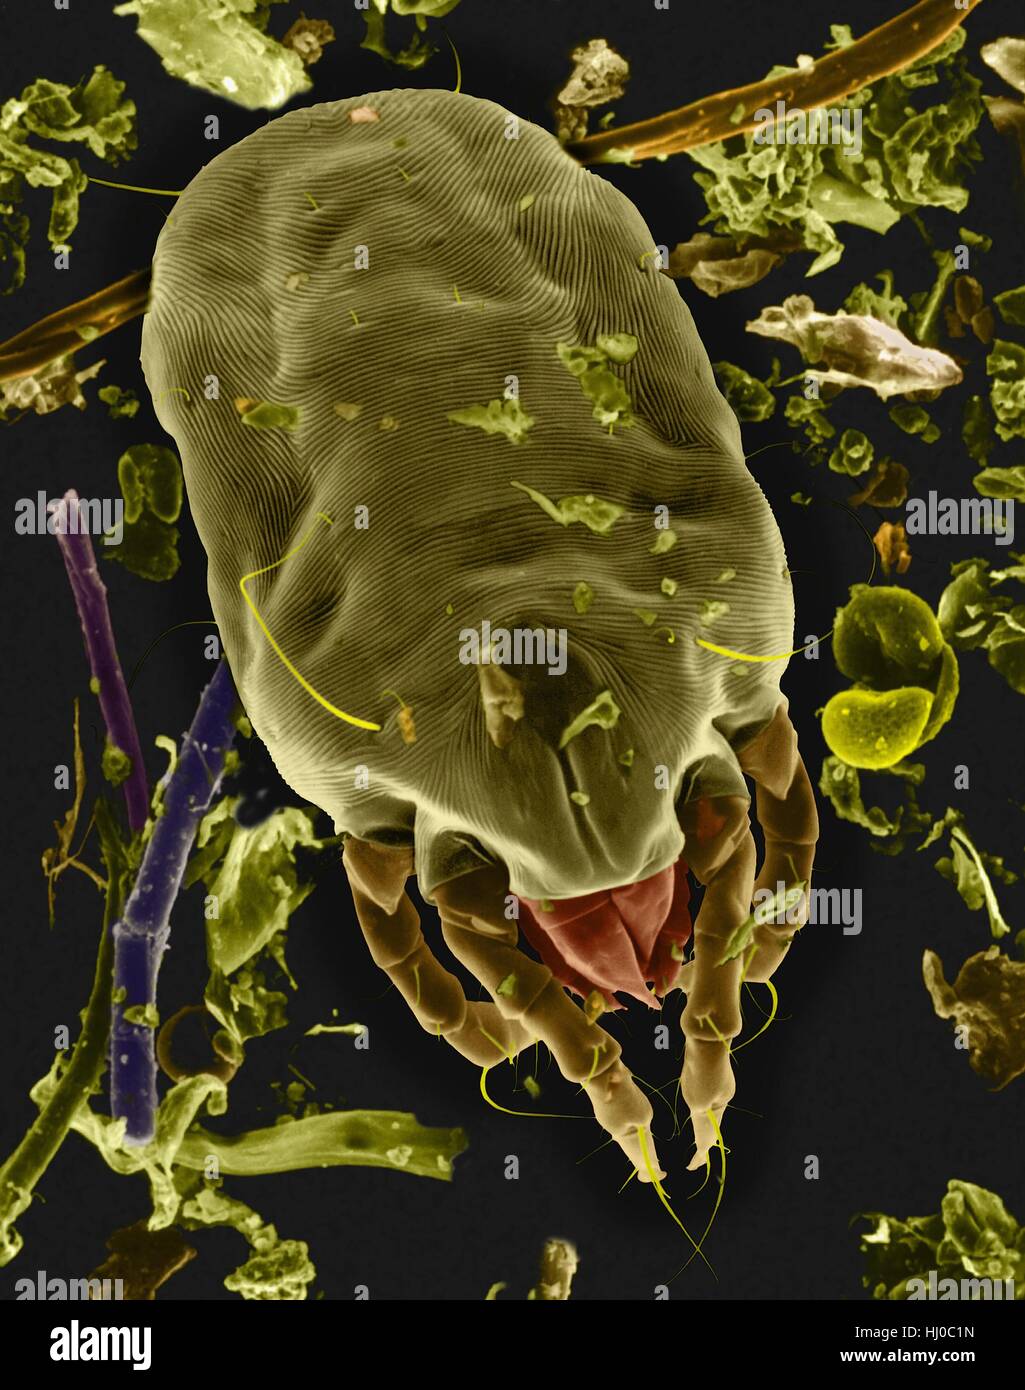 Coloured scanning electron micrograph (SEM) of Dust mite (Dermatophagoides sp.).Millions of dust mites inhabit home,feeding on dead human skin that are common in house dust.The mite's body is in three parts: gnathosoma (head region) adapted for feeding on dead skin,the propodosma (carrying 1st 2nd Stock Photo